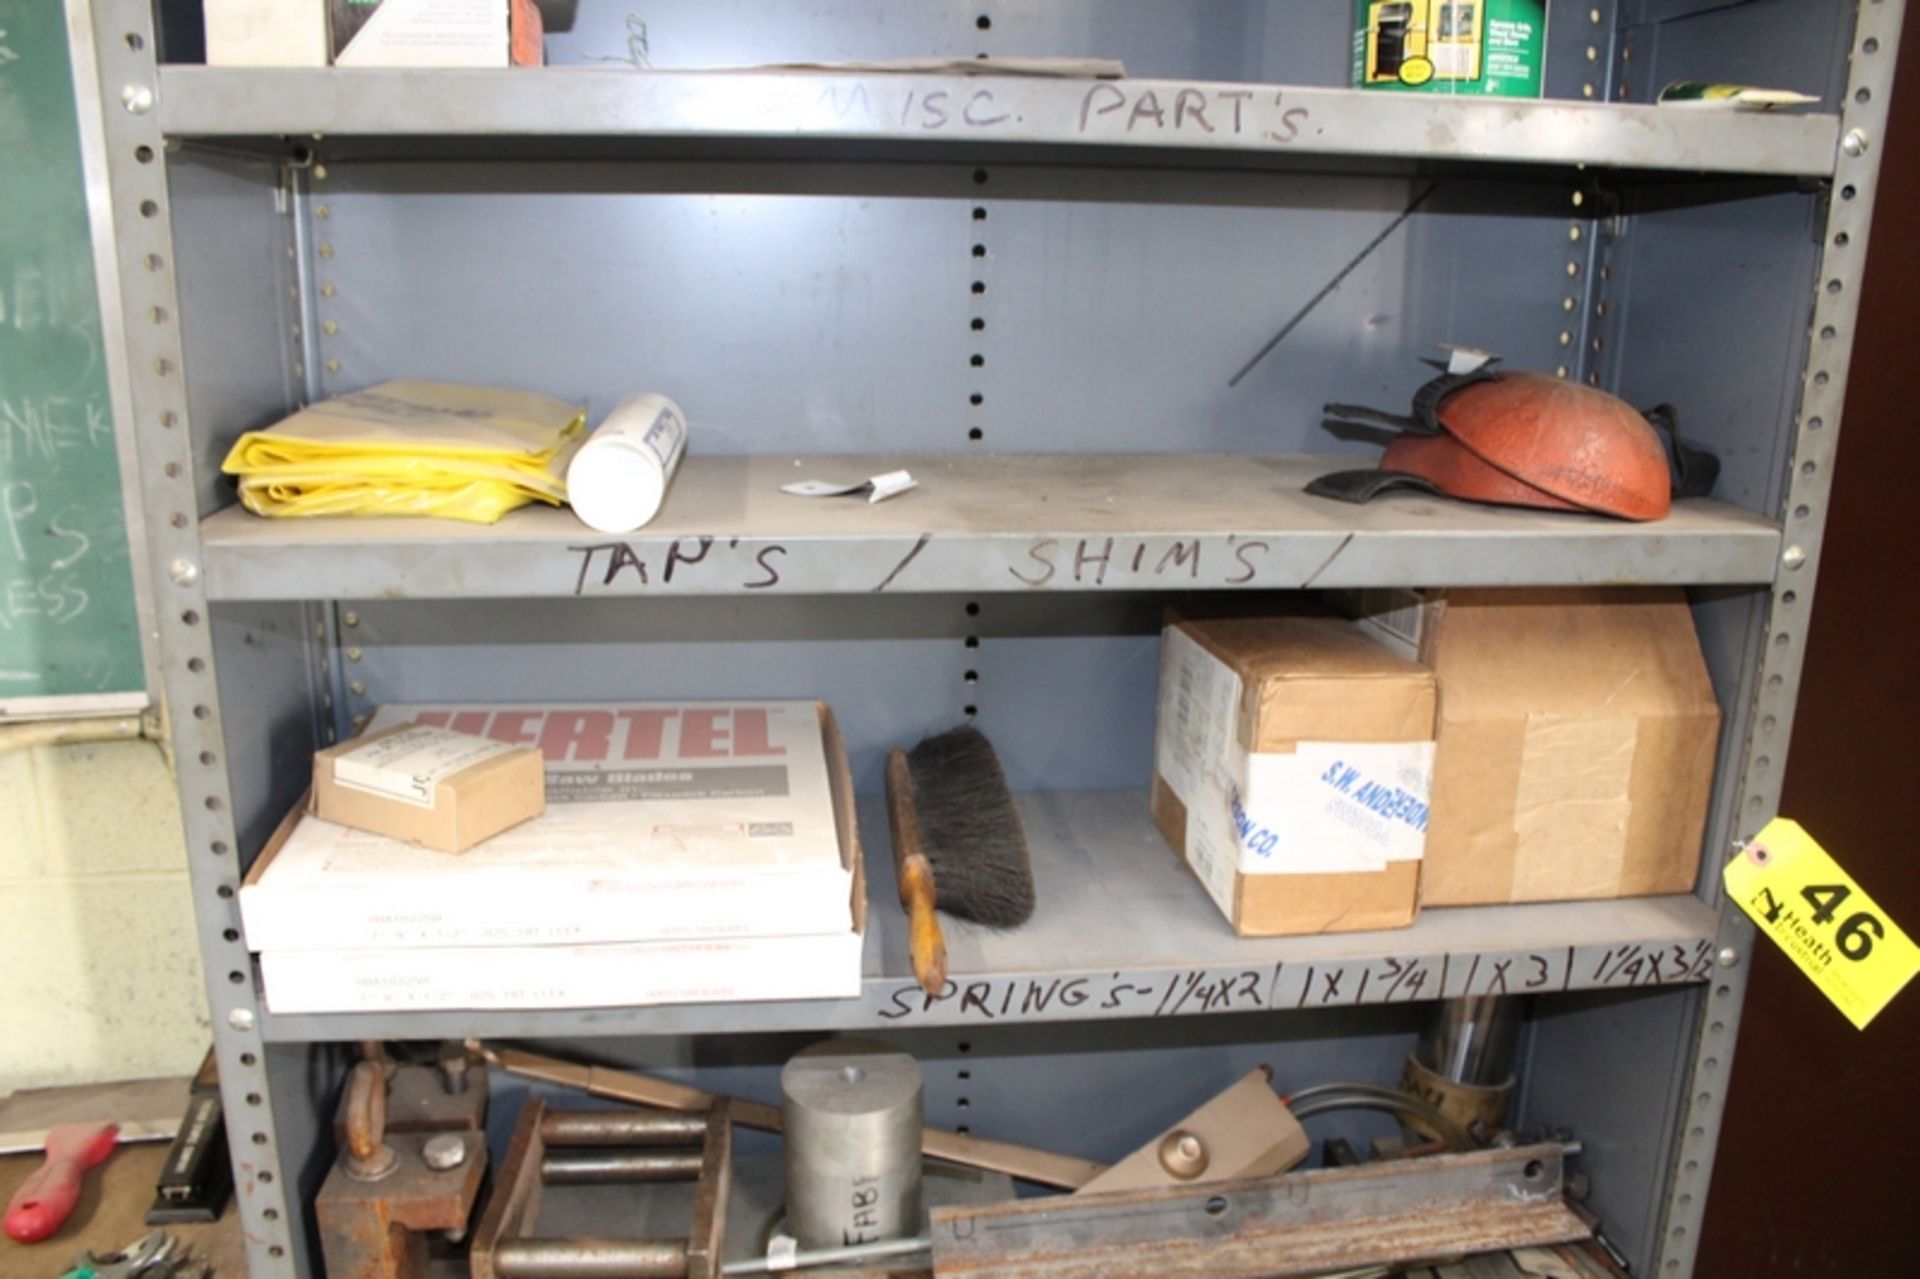 ADJUSTABLE STEEL SHELVING UNIT WITH CONTENTS, 36"X 12" X 63" - Image 2 of 3